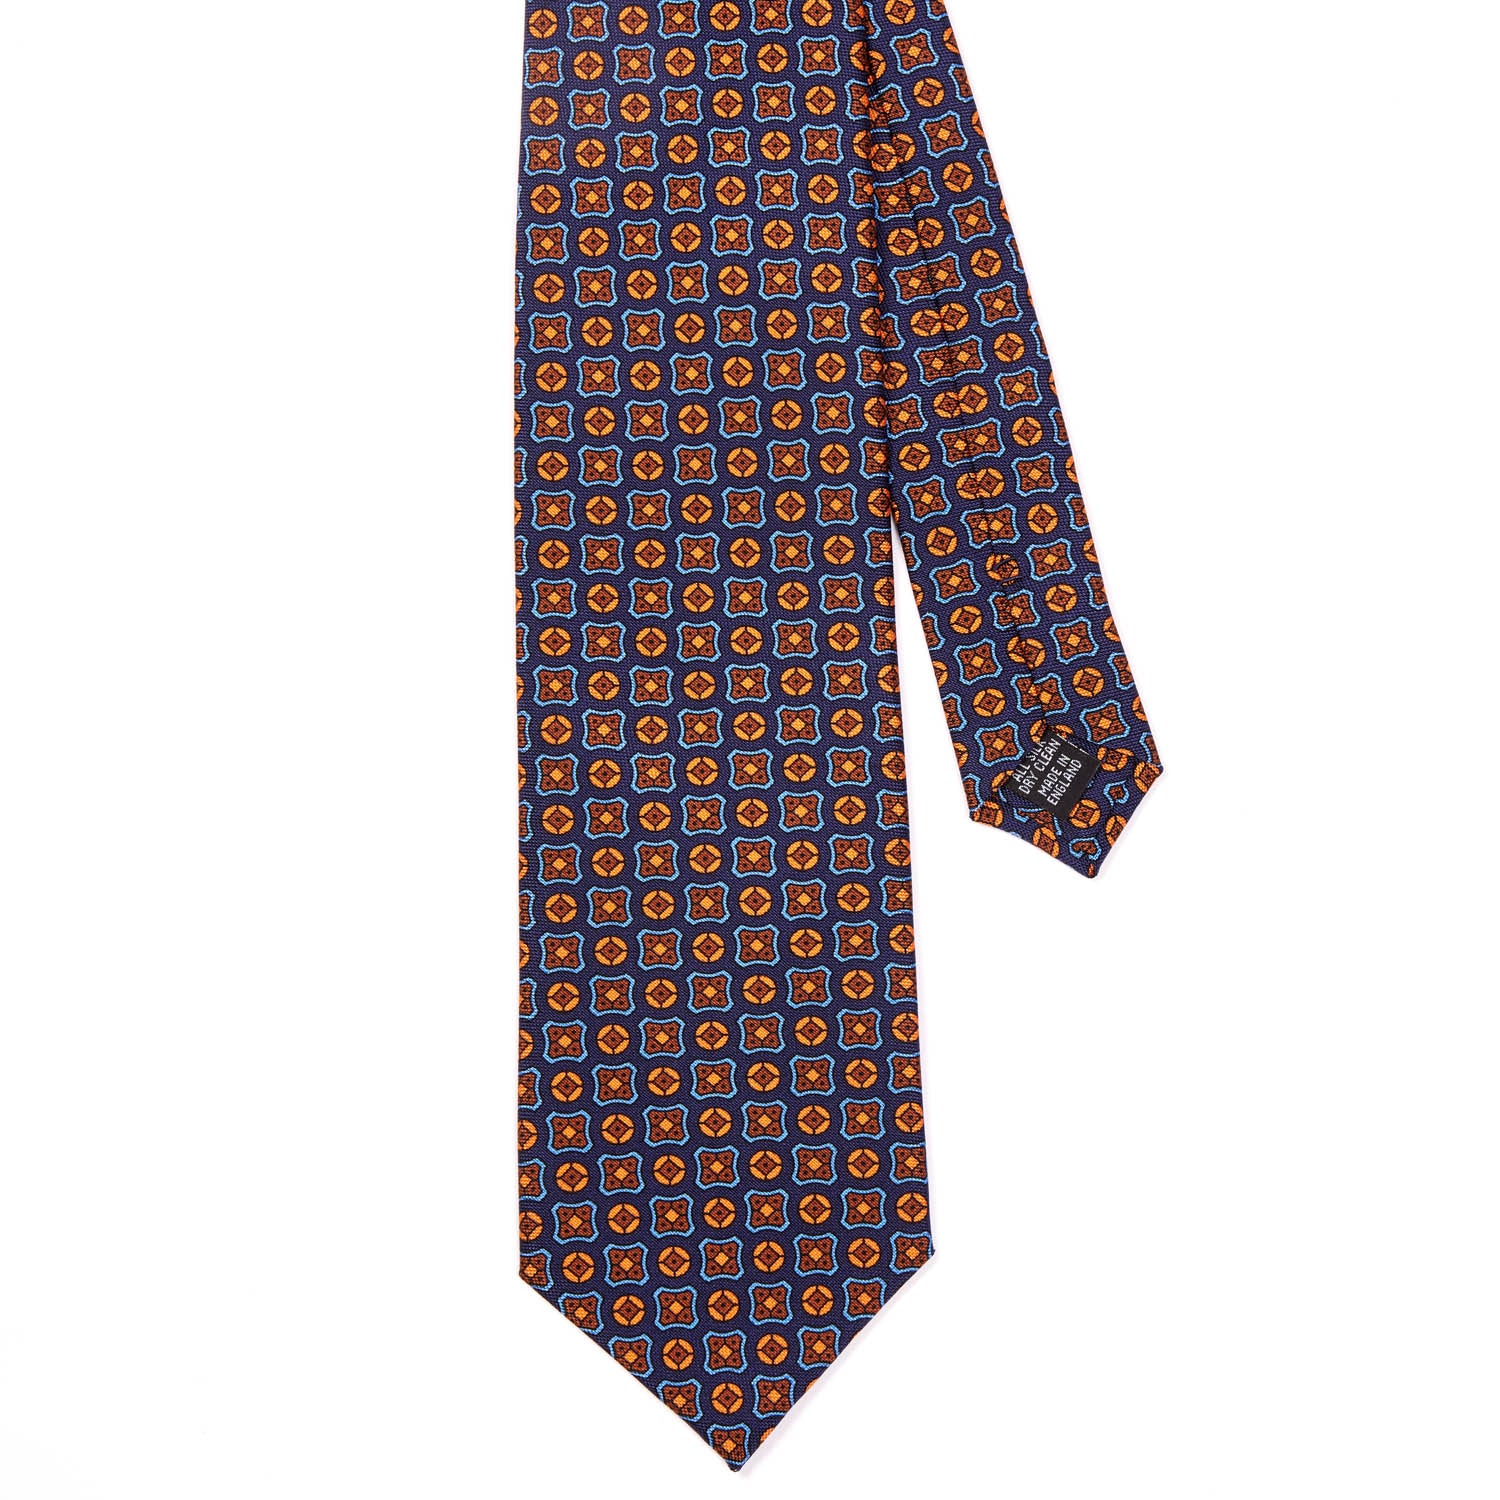 A Sovereign Grade Navy Hopsack Tie, 150 cm by KirbyAllison.com with a square pattern in blue and orange.